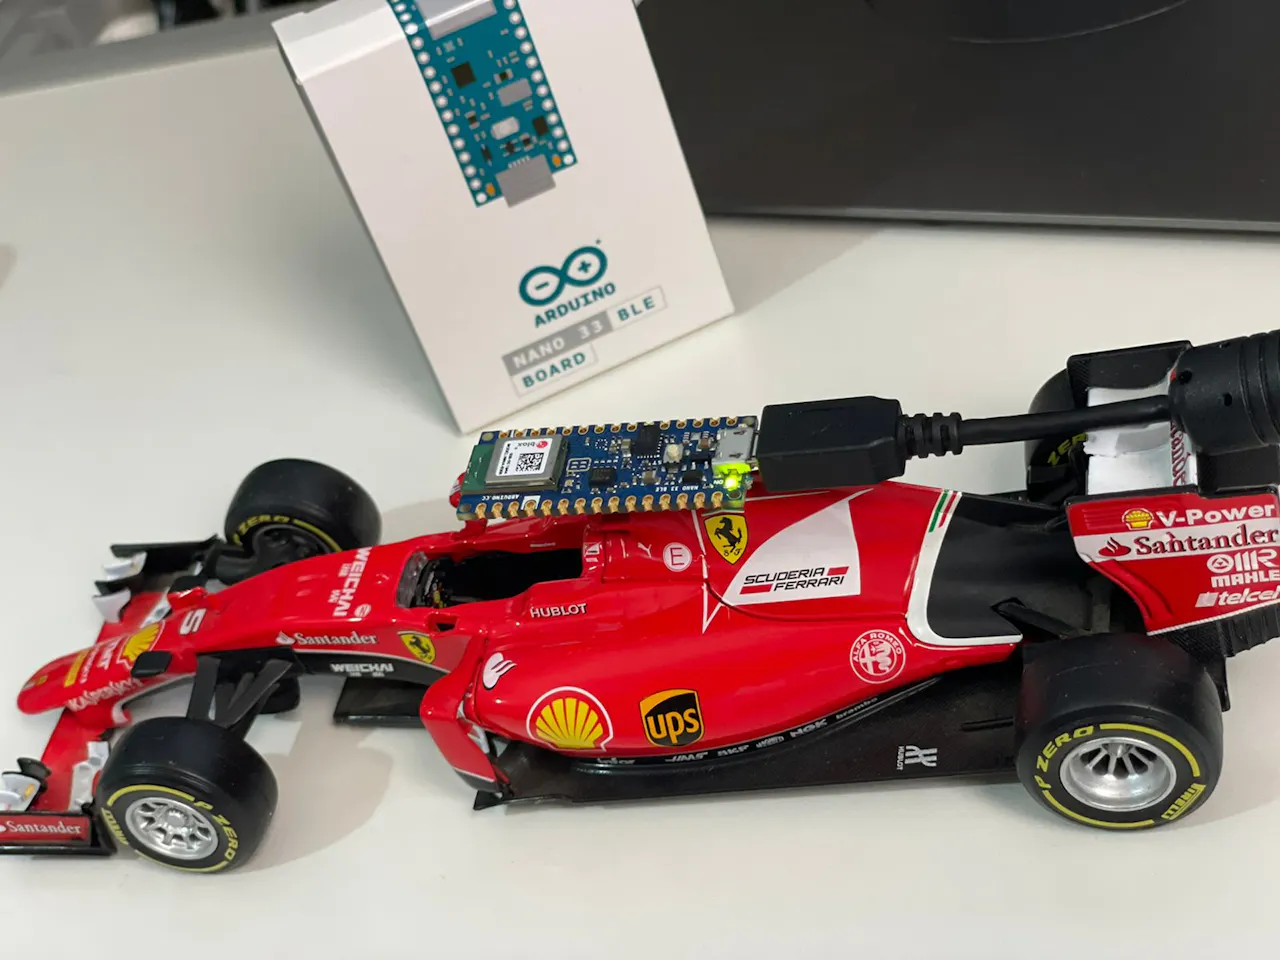 Kick off the Monaco Grand Prix weekend with these Formula 1-inspired Arduino projects